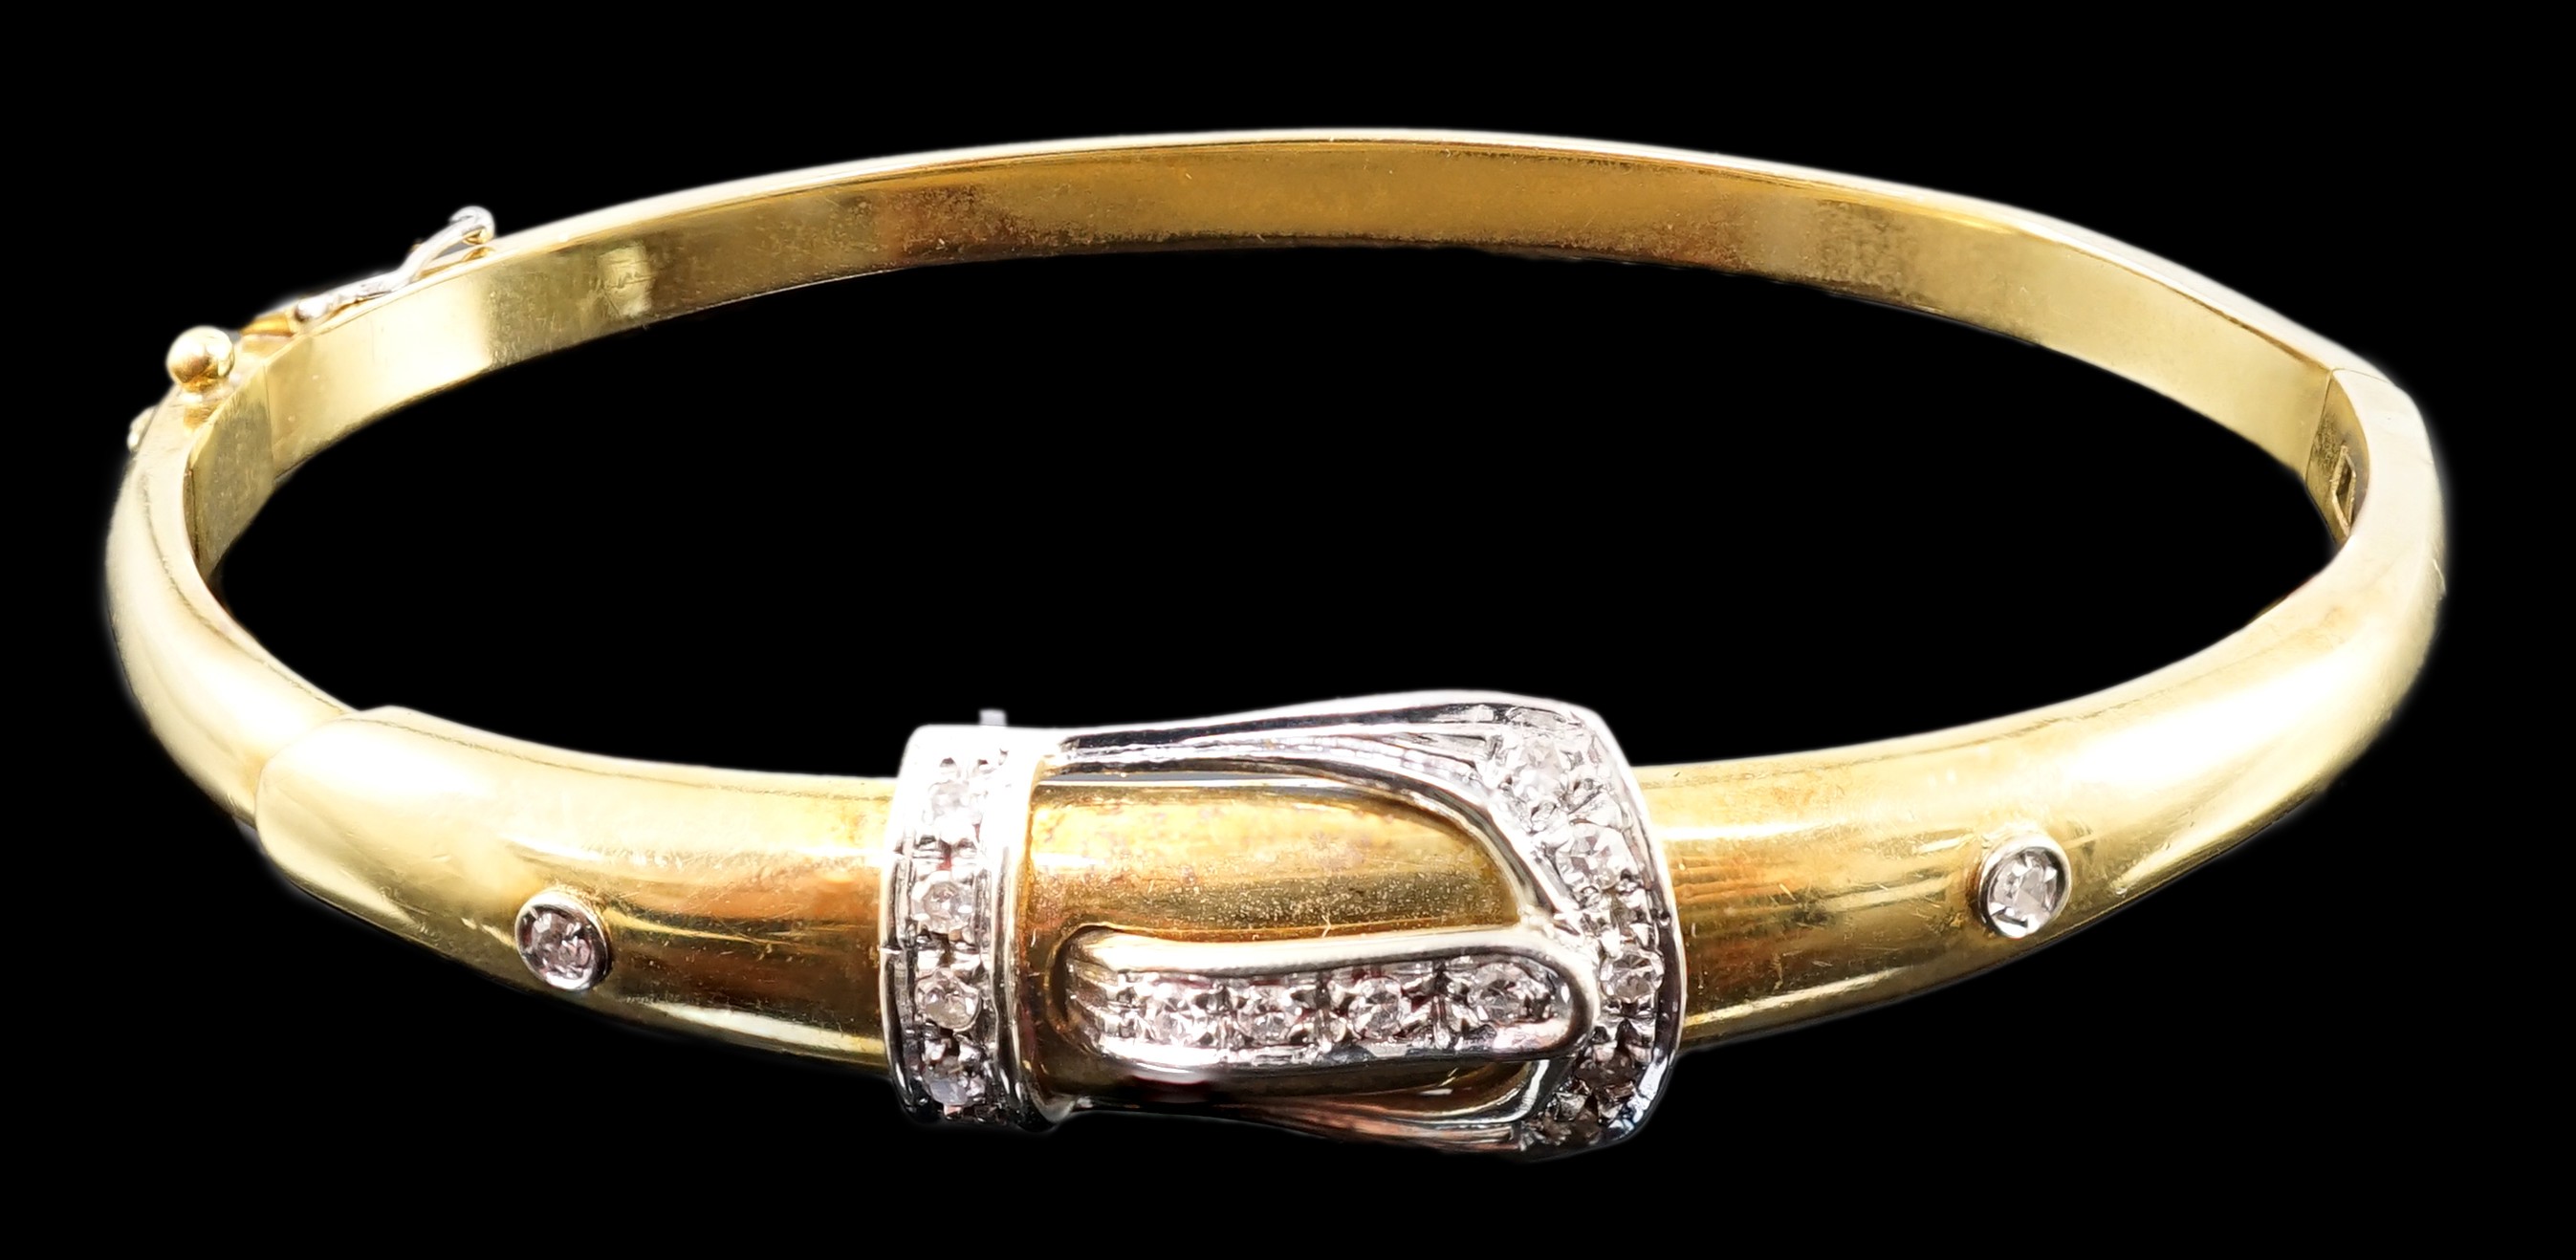 A gold and diamond set hinged bangle with central buckle motif                                                                                                                                                              